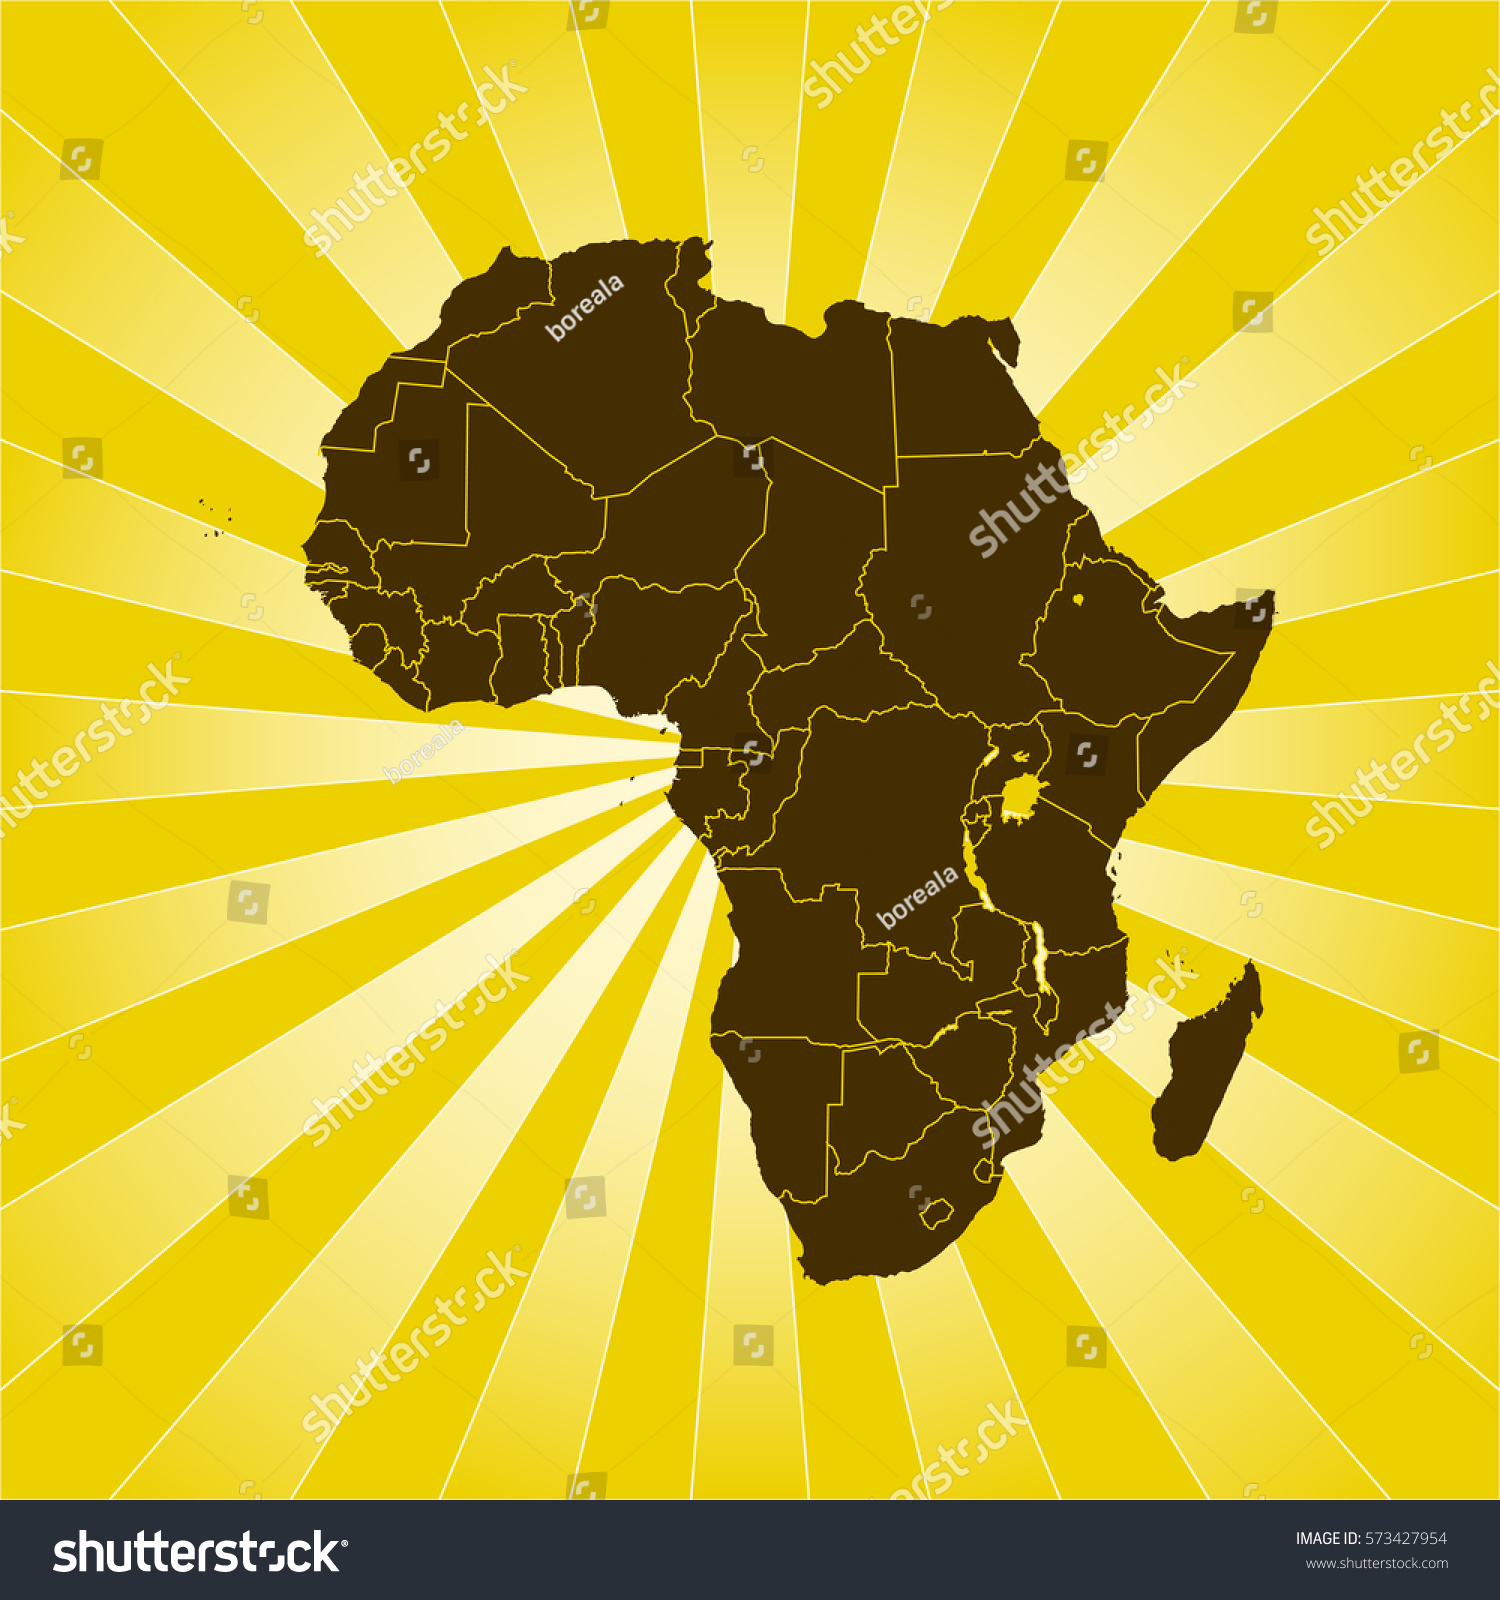 Map Of Africa Royalty Free Stock Vector 573427954 6095